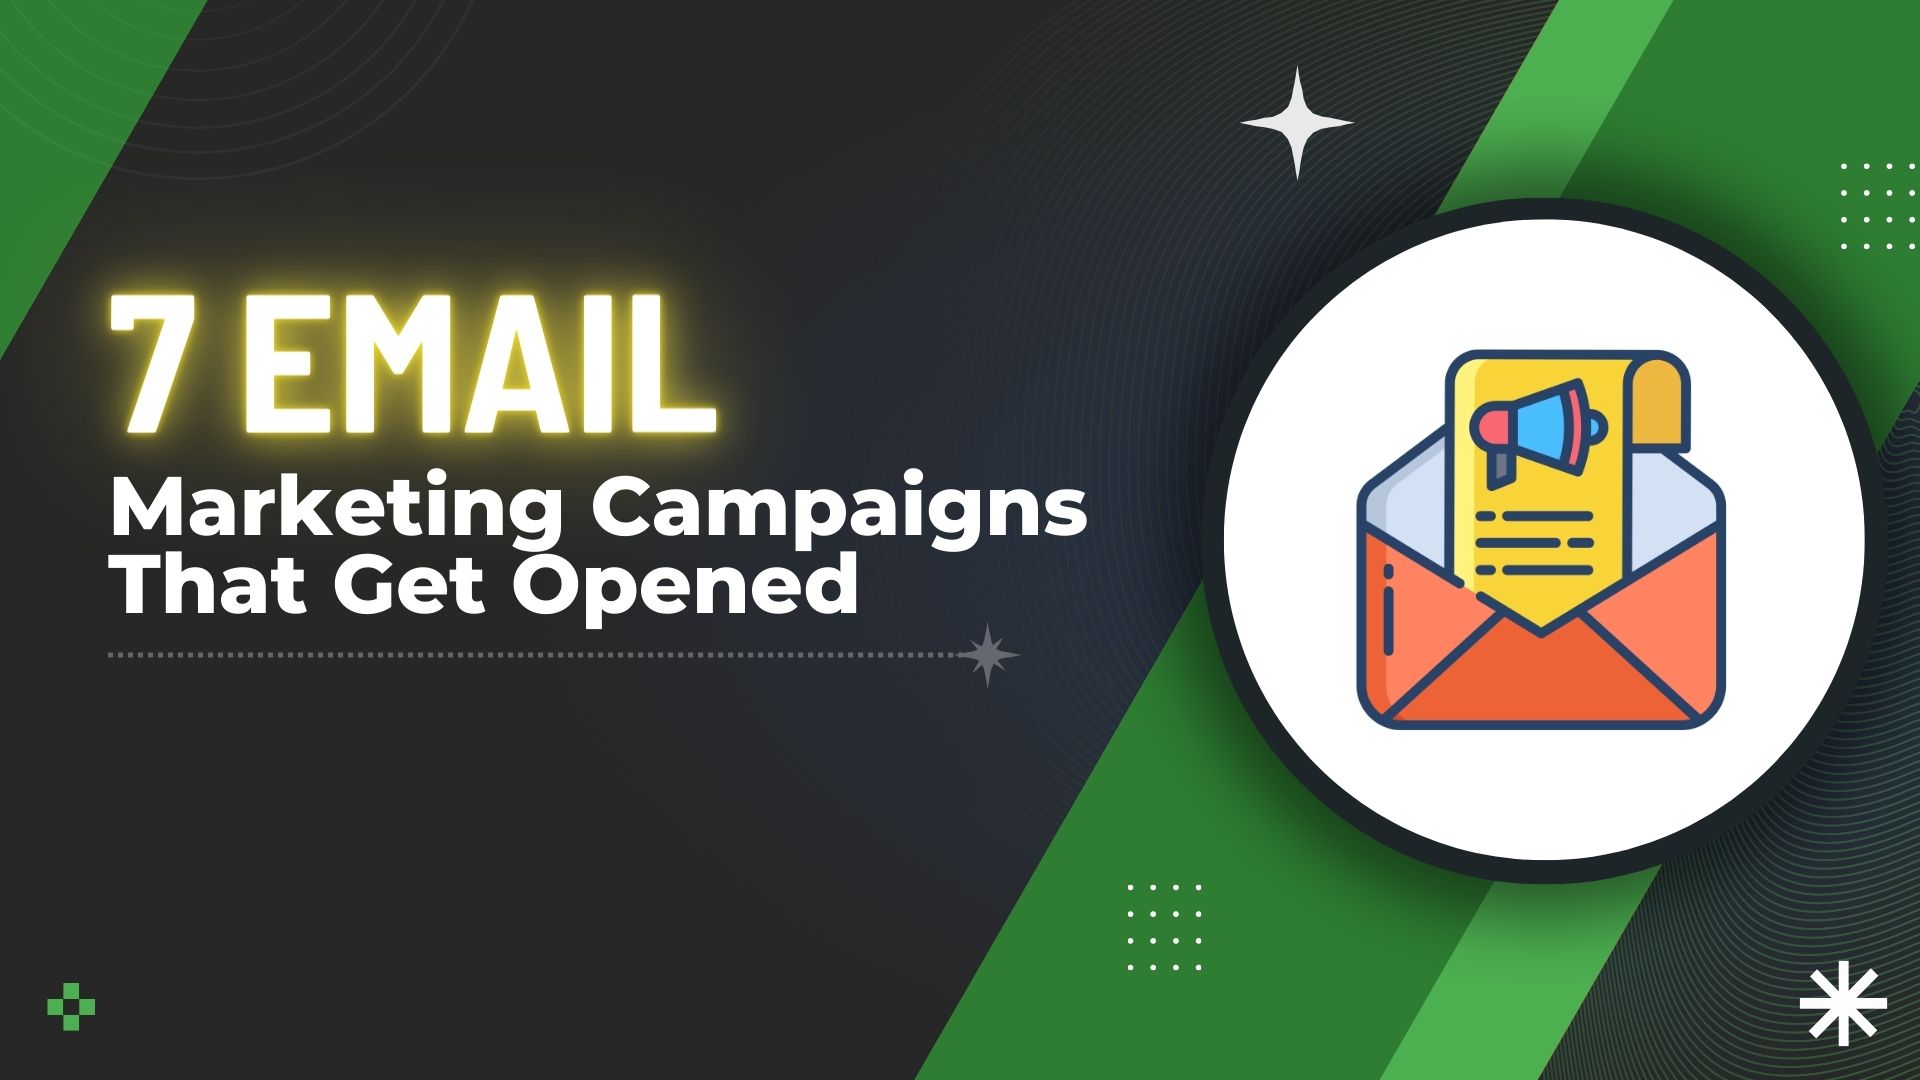 7 Email Marketing Campaigns That Get Opened